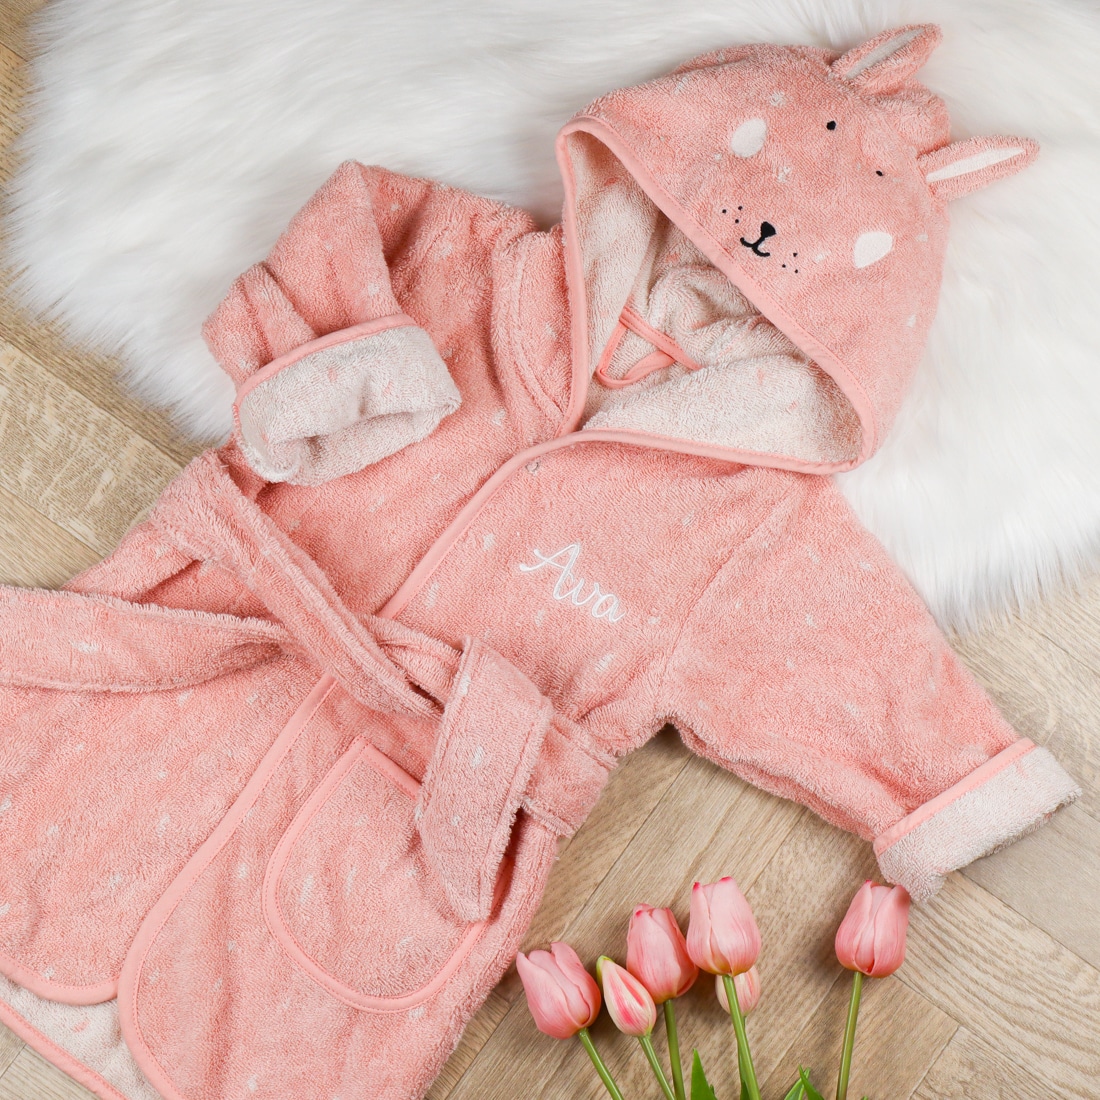 Oh Sew Simple Roo (Winnie The Pooh) Pink Personalised Fleece Dressing Gown/ Bathrobe- Available in 5 Sizes (12-18 Months) : Amazon.co.uk: Fashion